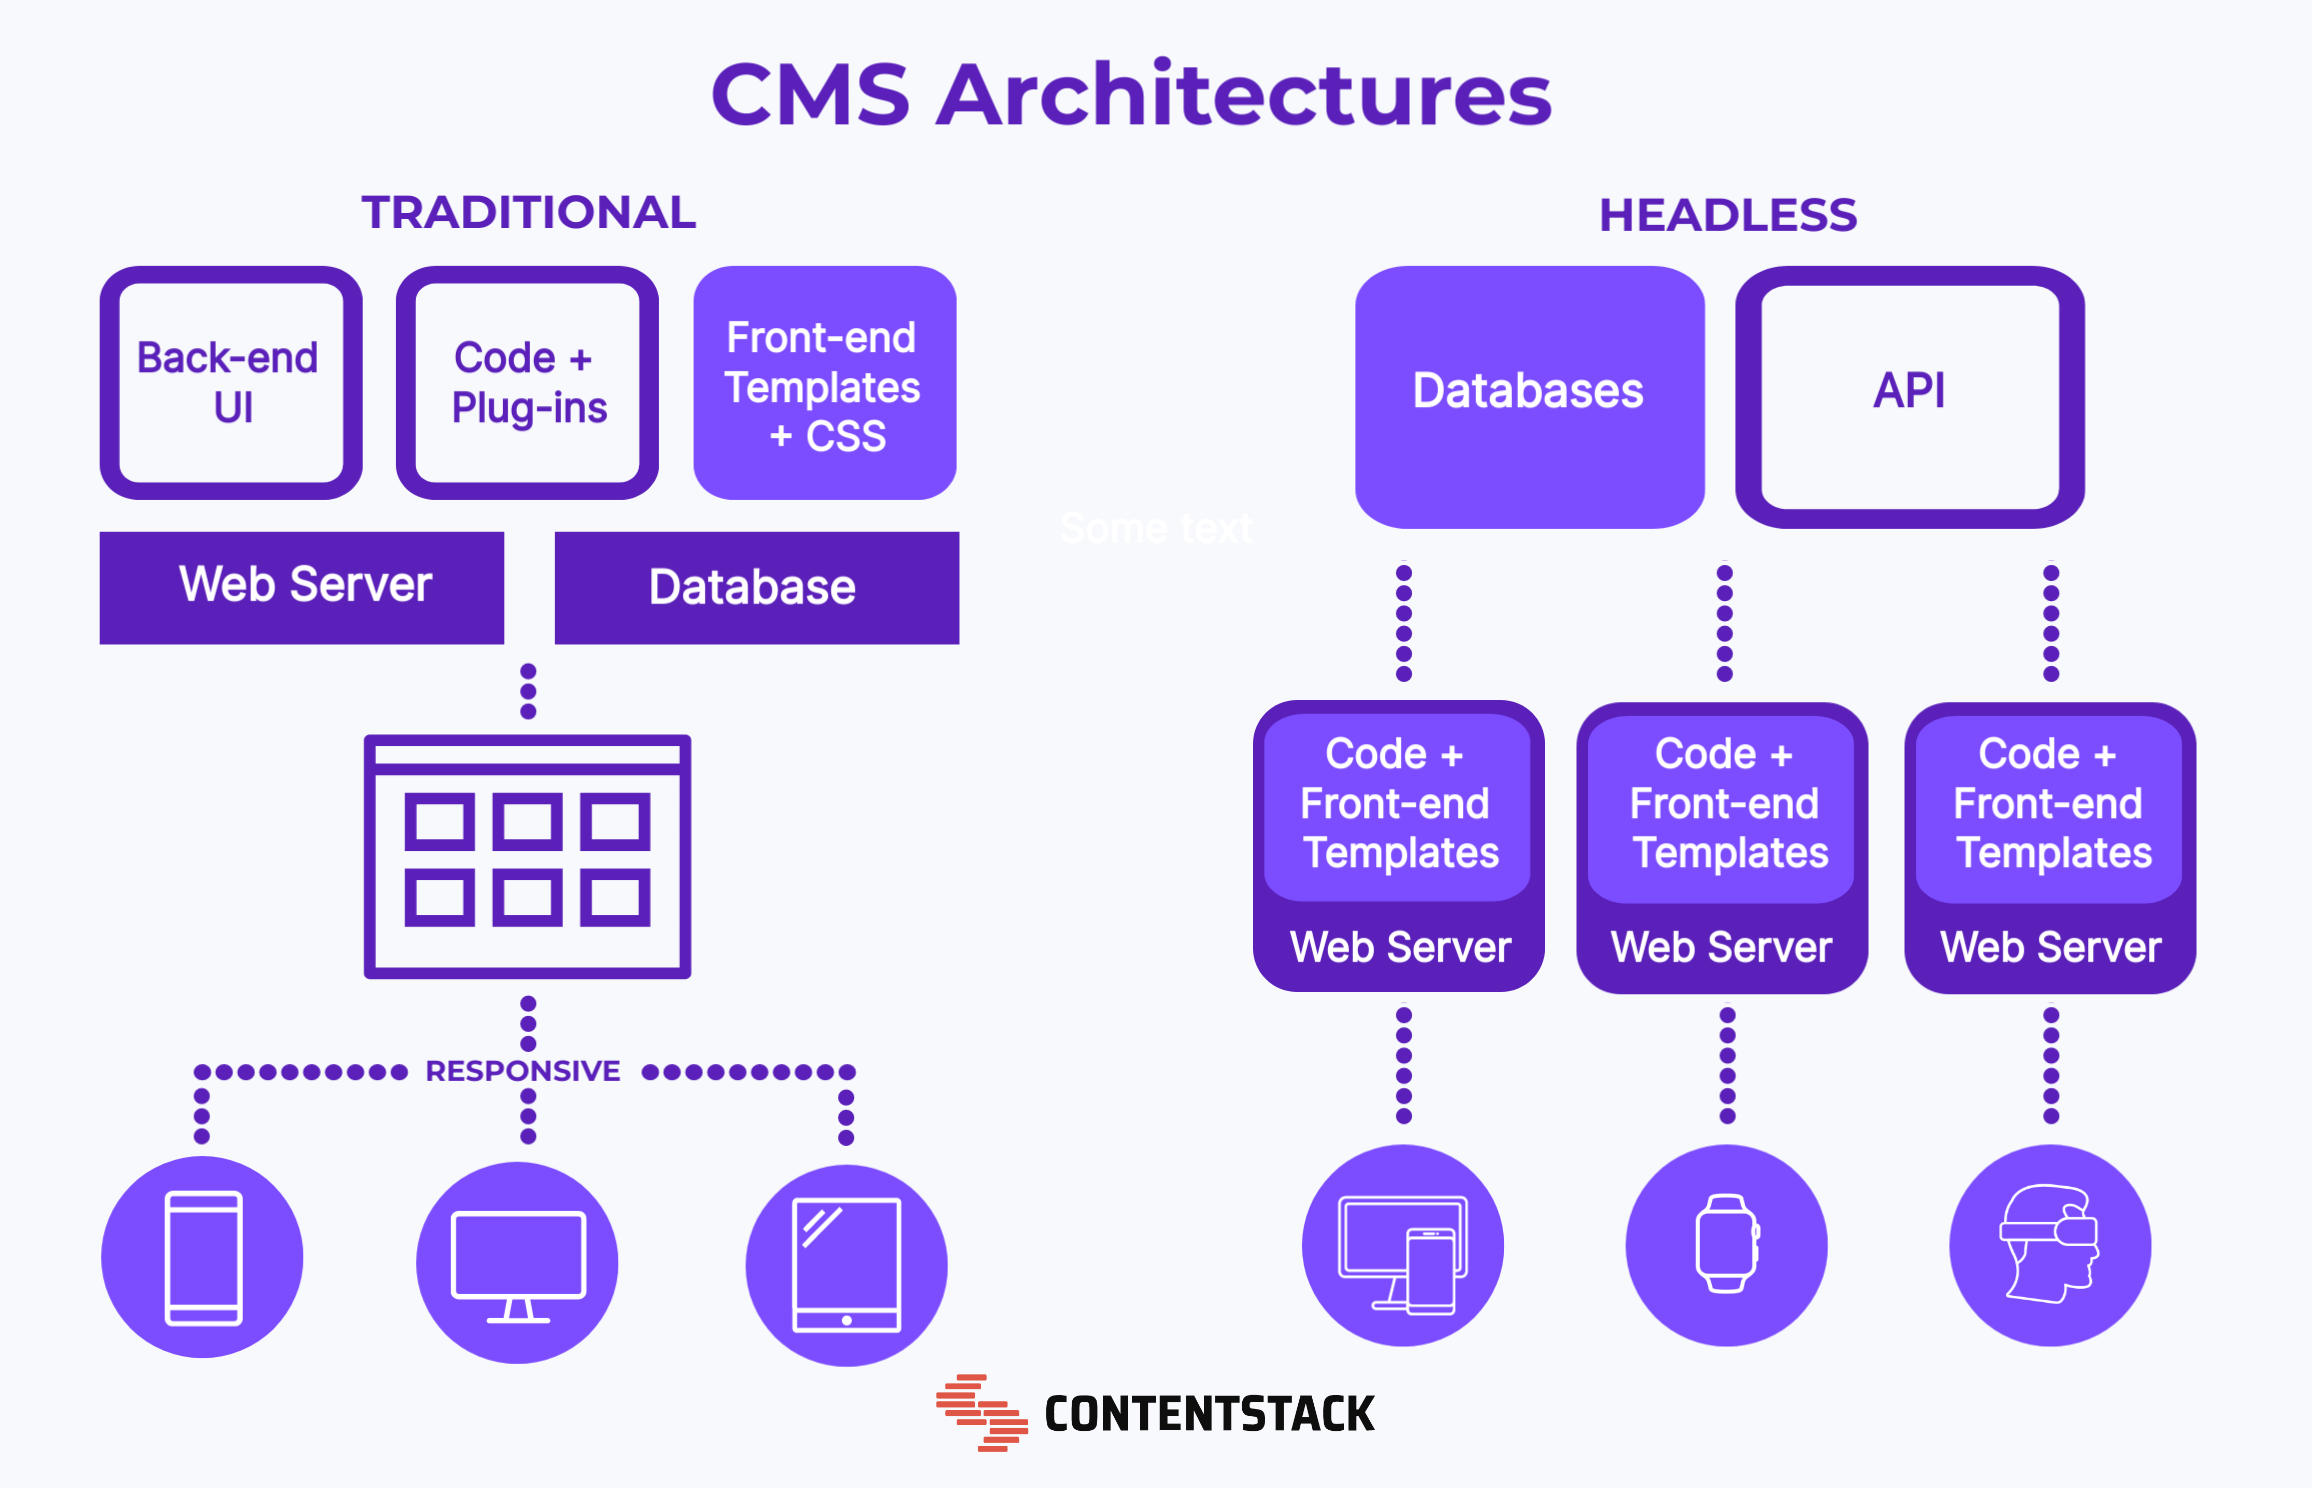 Infographic comparing traditional CMS architecture to headless CMS architecture.